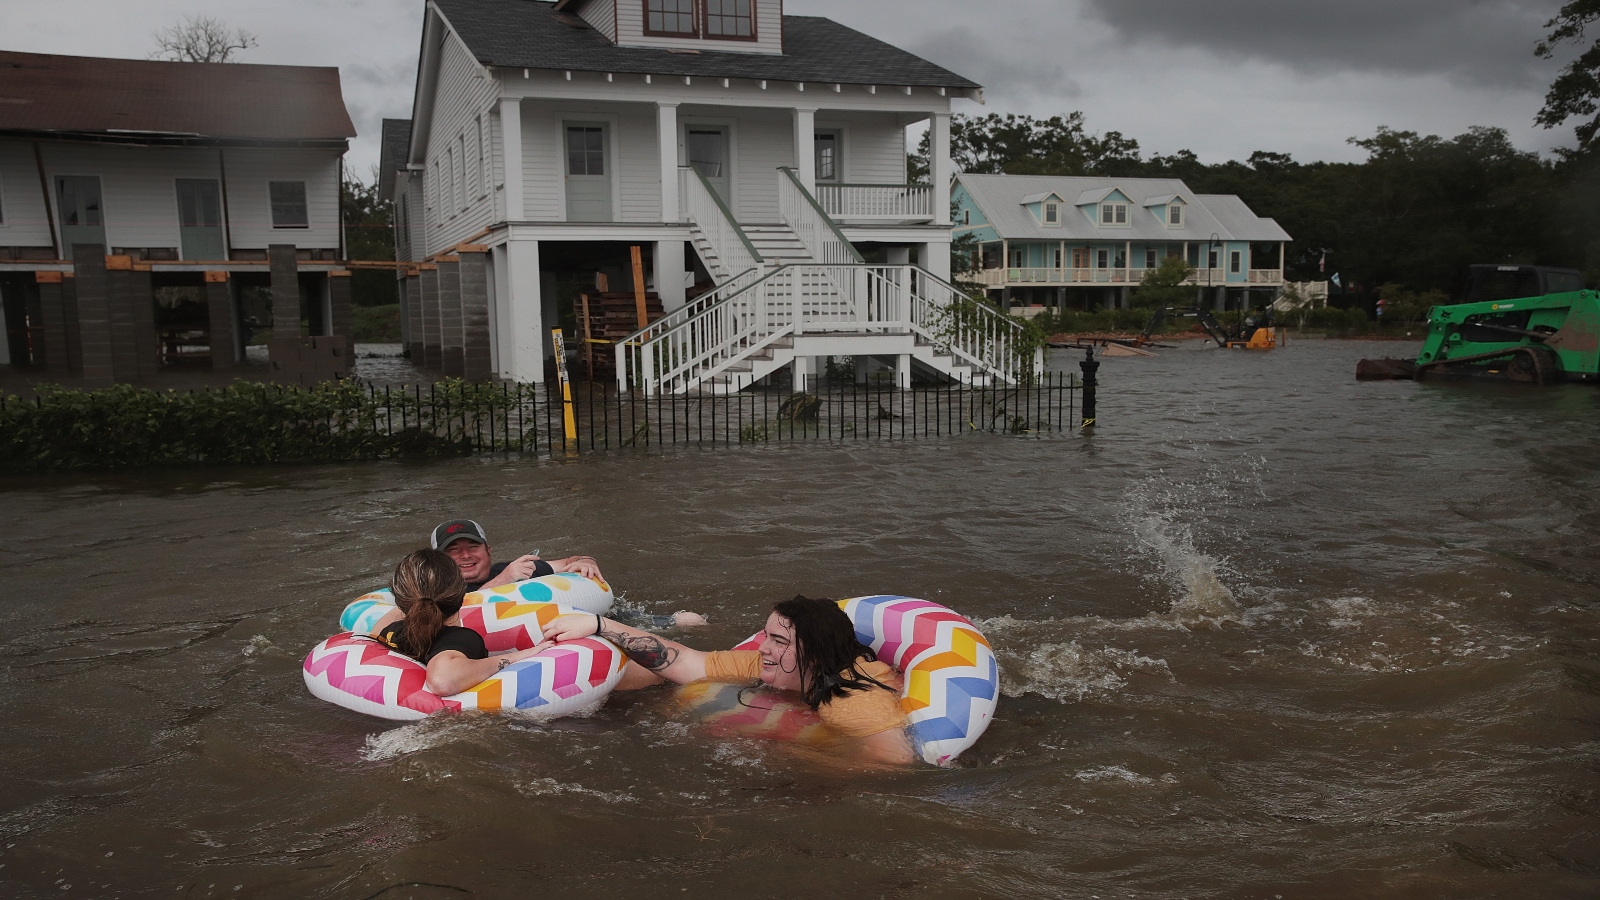 People float in inner tubes down Lakeshore Drive in Mandeville, Louisiana, which flooded in the wake of Hurricane Barry in July 2019.